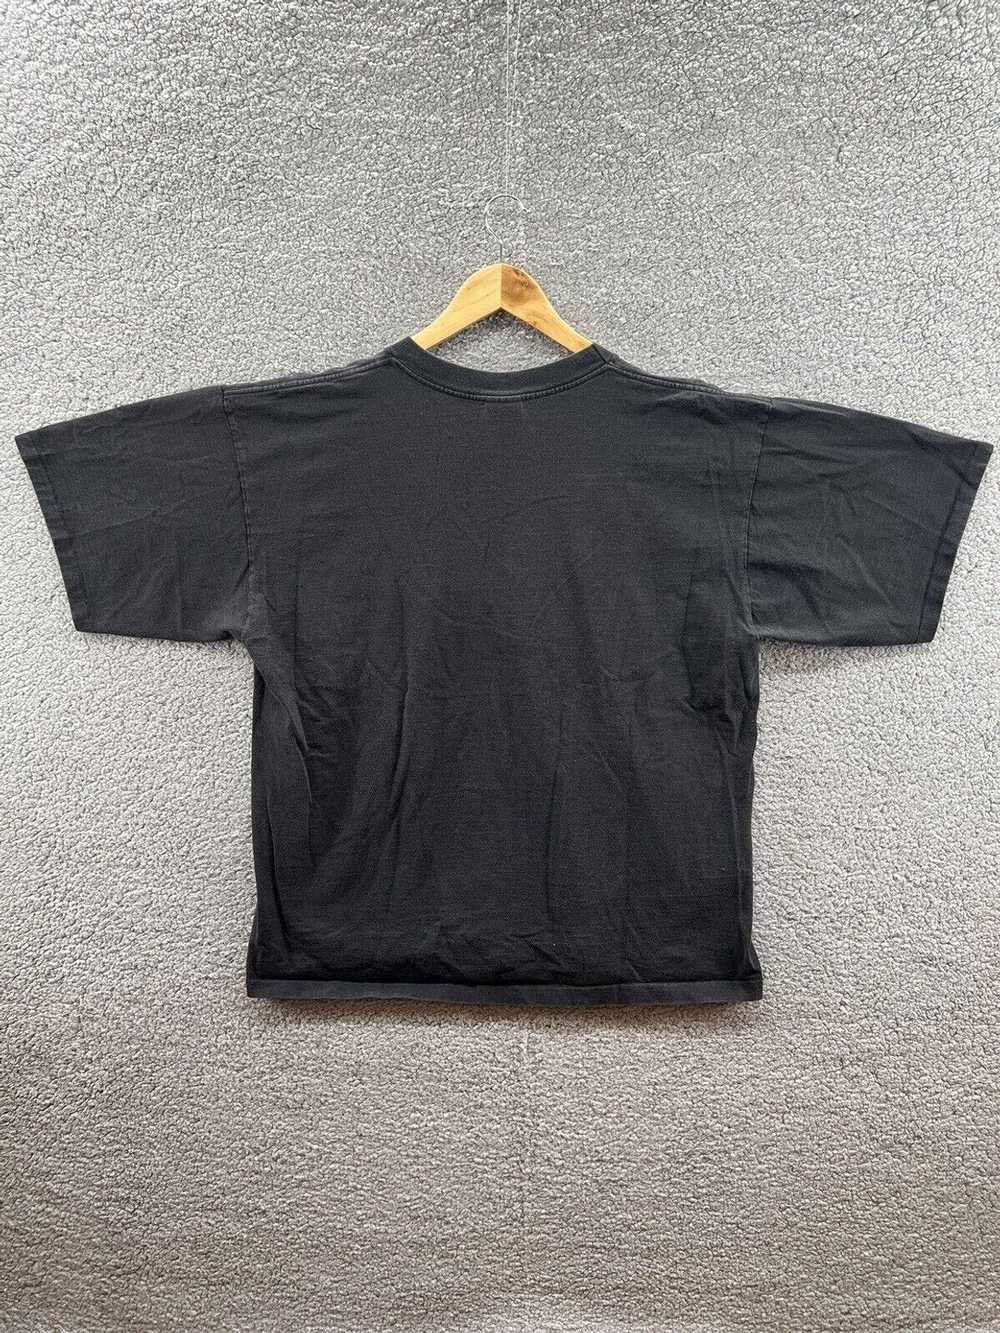 Other Alore Made In USA Black Gecko Vintage T-Shi… - image 2